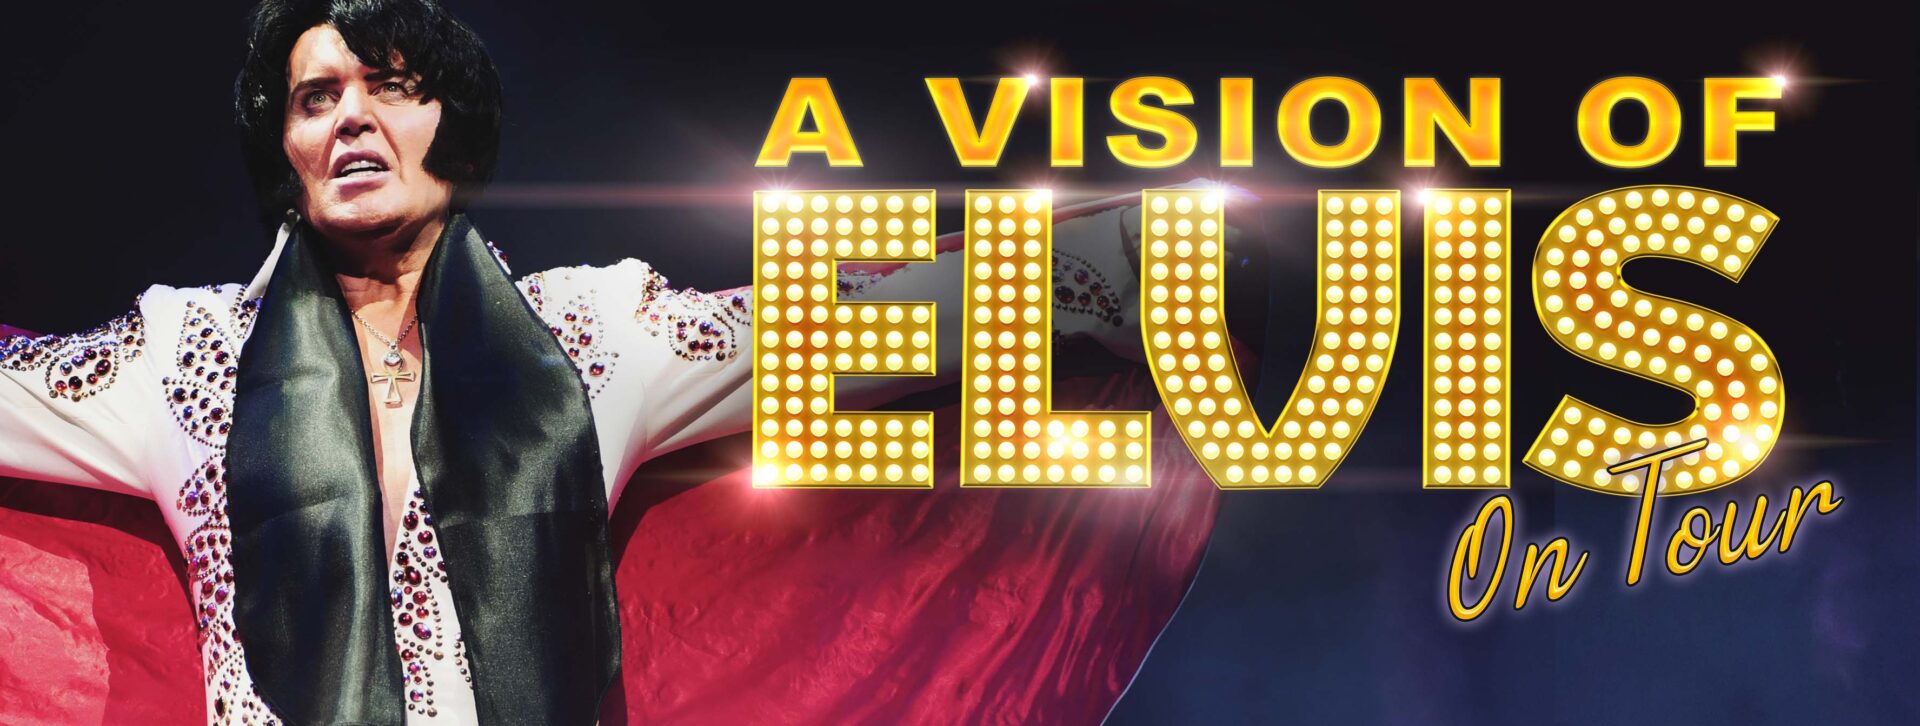 A Vision of Elvis